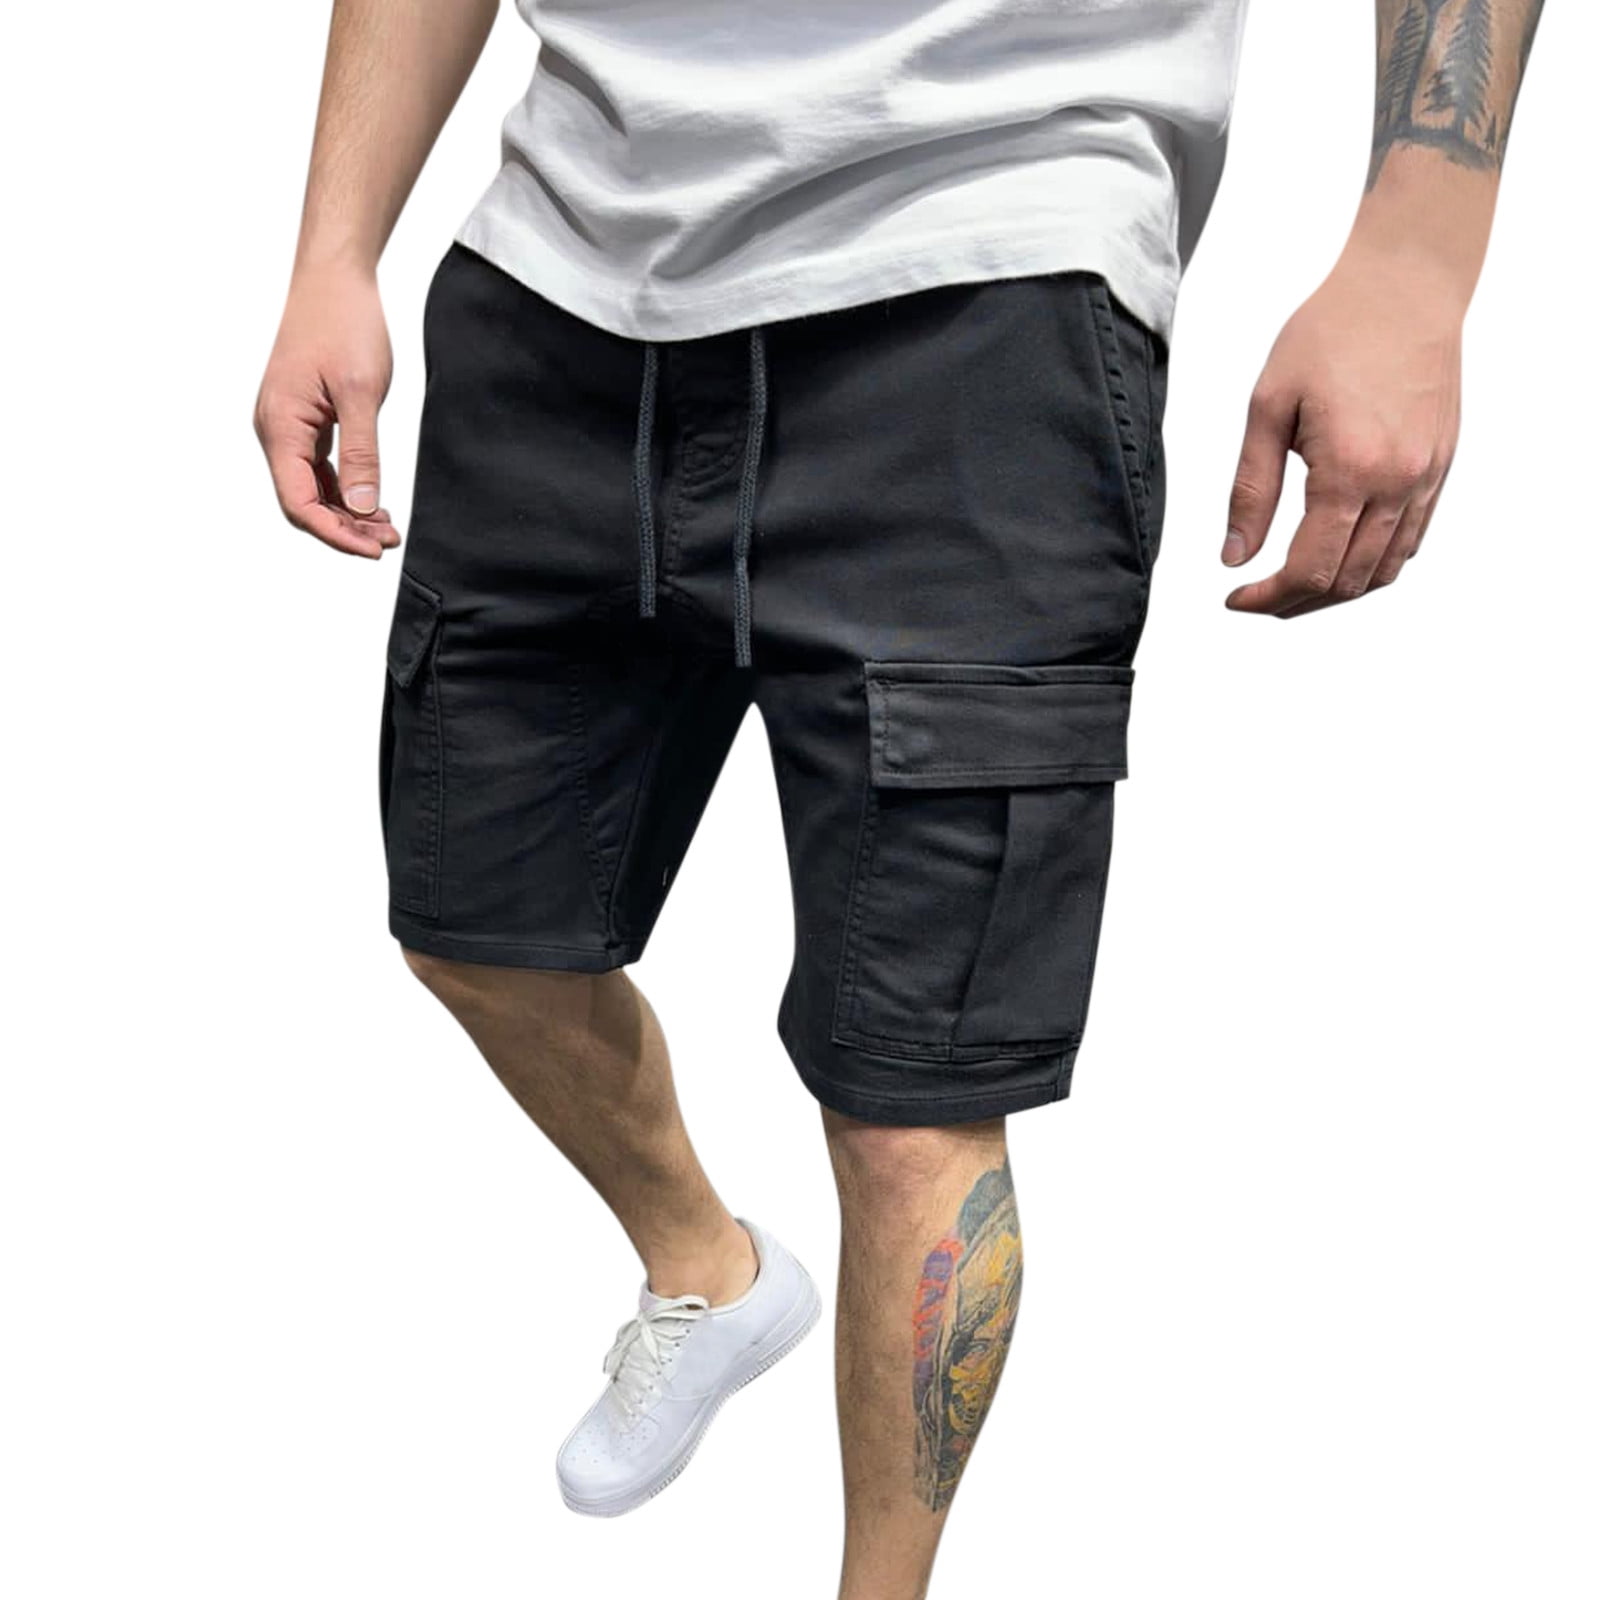 Outfmvch cargo pants for men Male Summer Slim Cargo Pant Drawstring ...